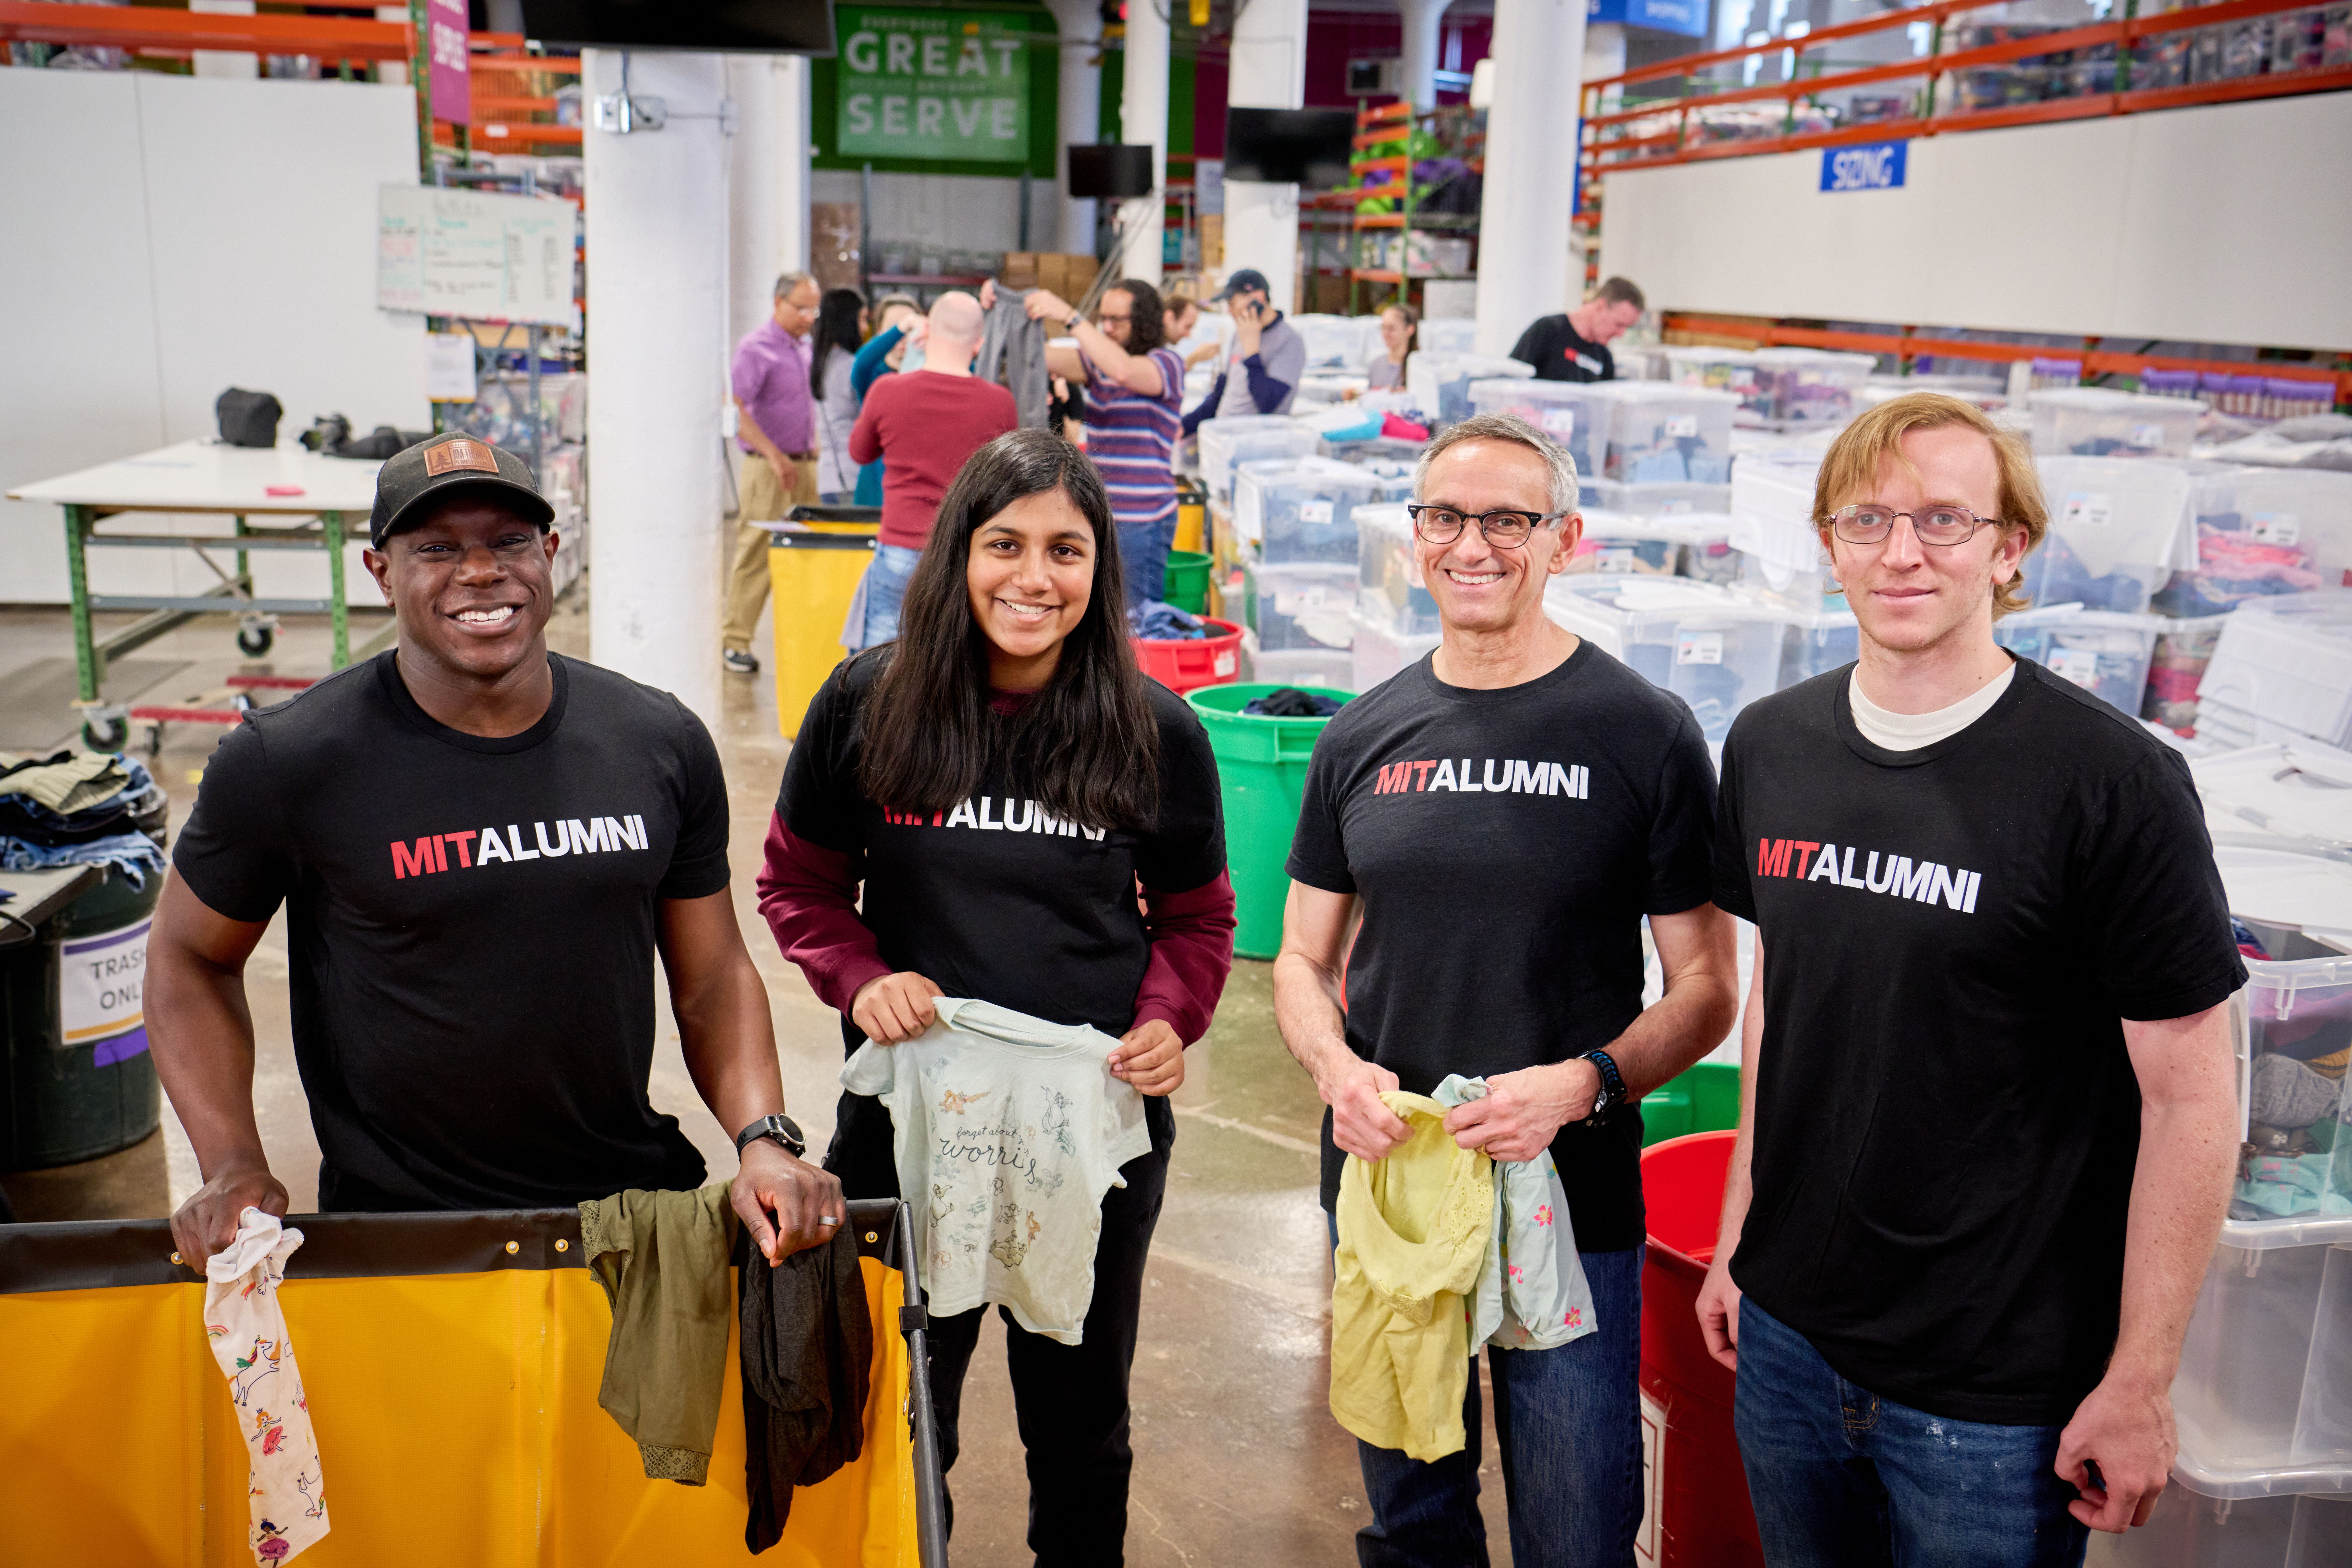 Four MIT Alumni wearing black shirts with MIT Alumni on the front stand in a warehouse holding clothes